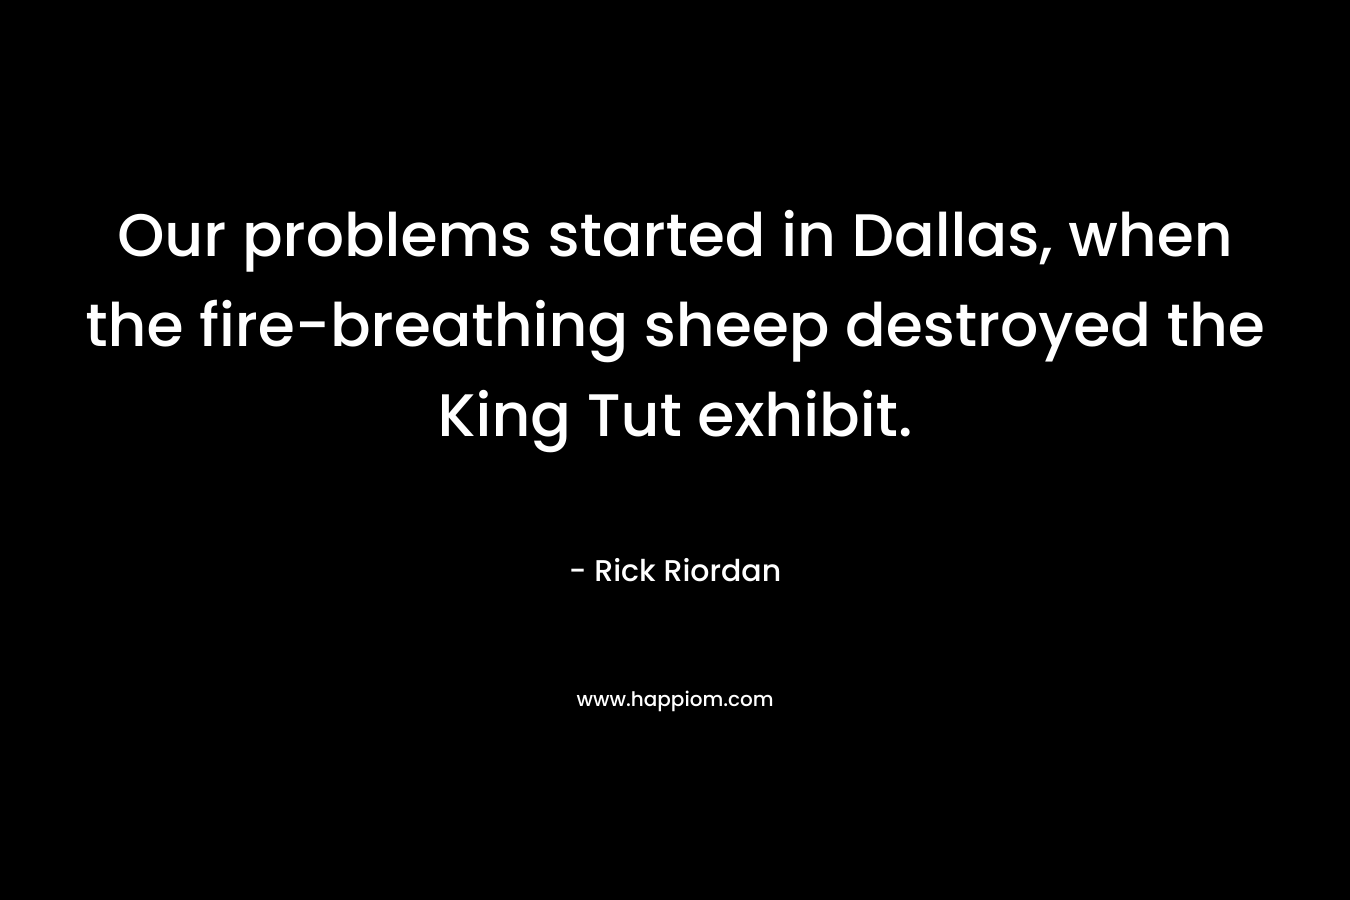 Our problems started in Dallas, when the fire-breathing sheep destroyed the King Tut exhibit. – Rick Riordan